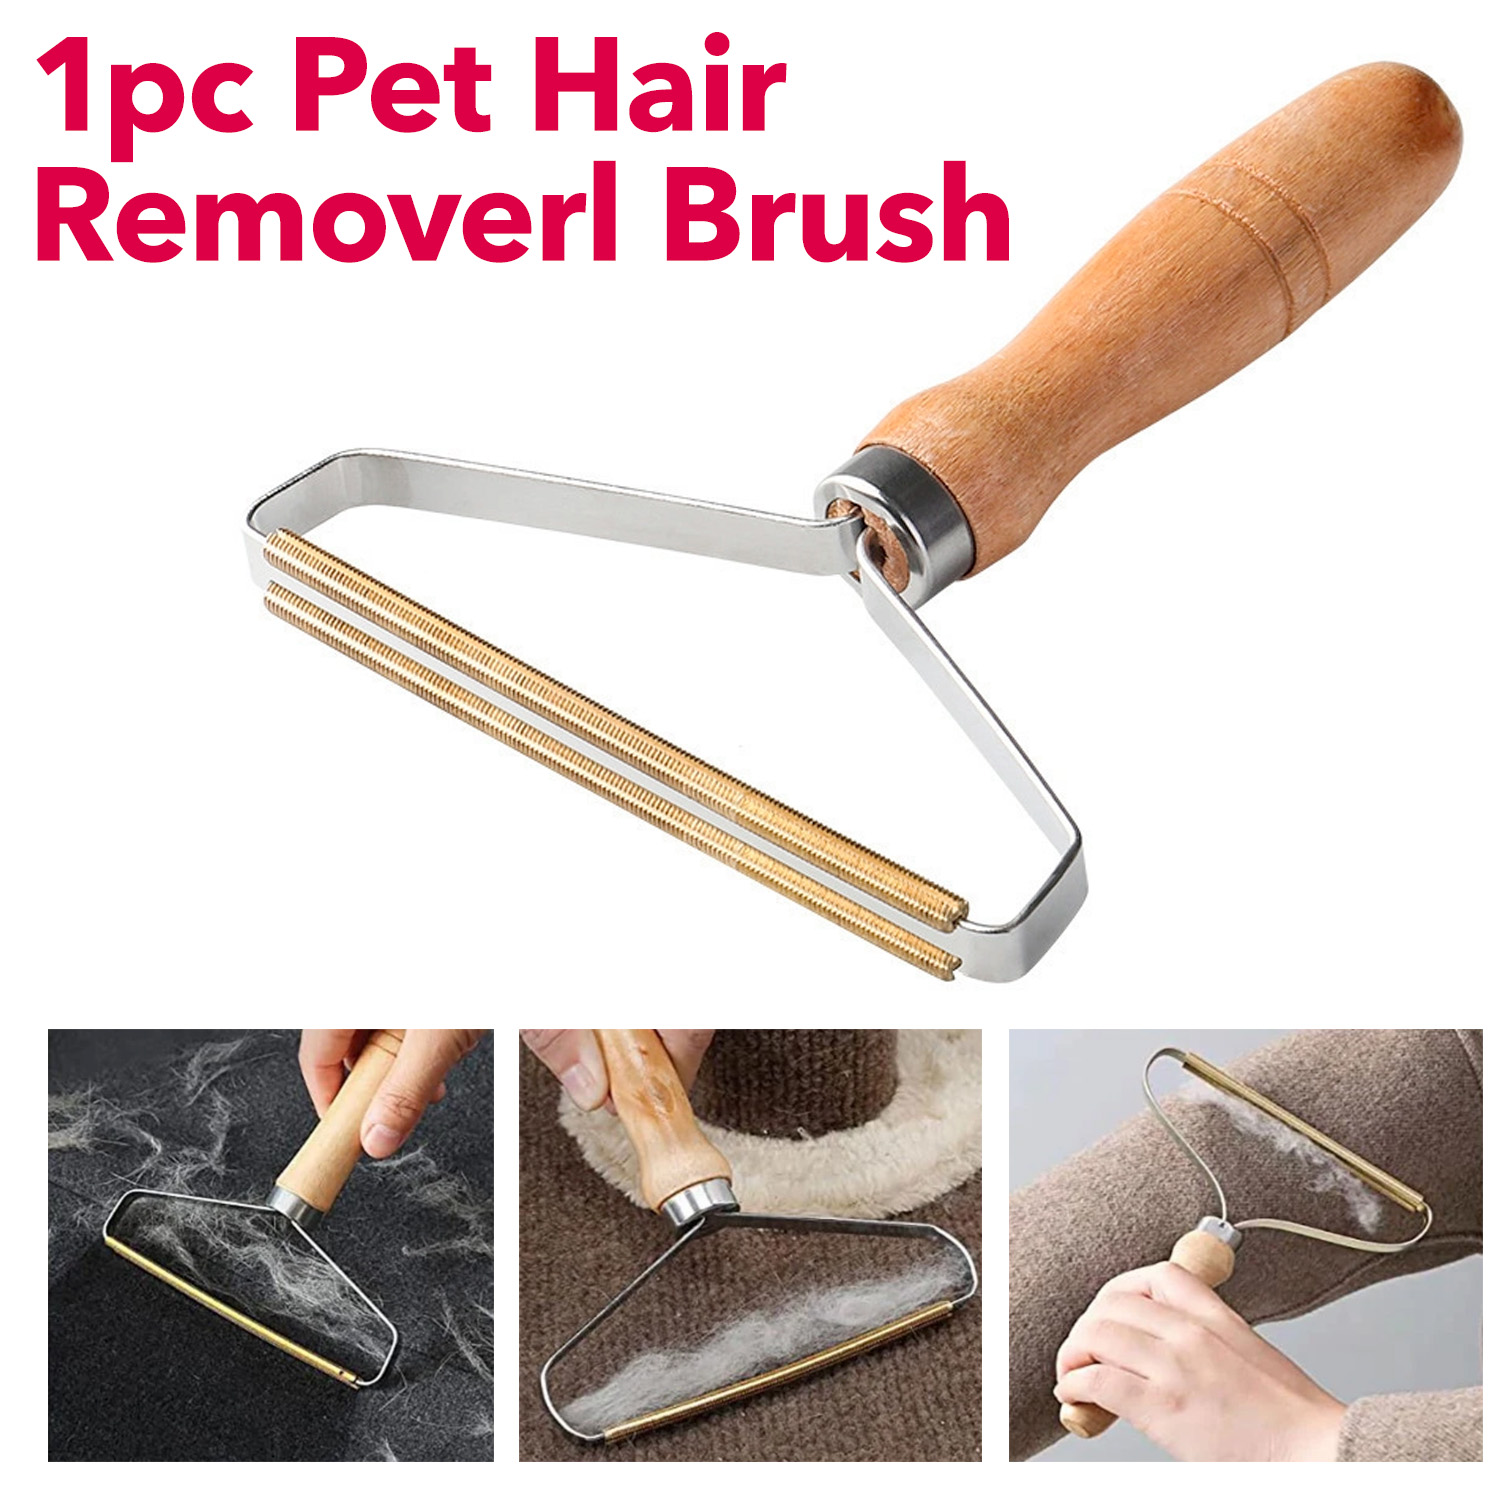 1 Pieces Pet Hair Remover Brush For Dog & Cat Dog Hair Removal Brush With Wood Handle For Clothes and Blankets